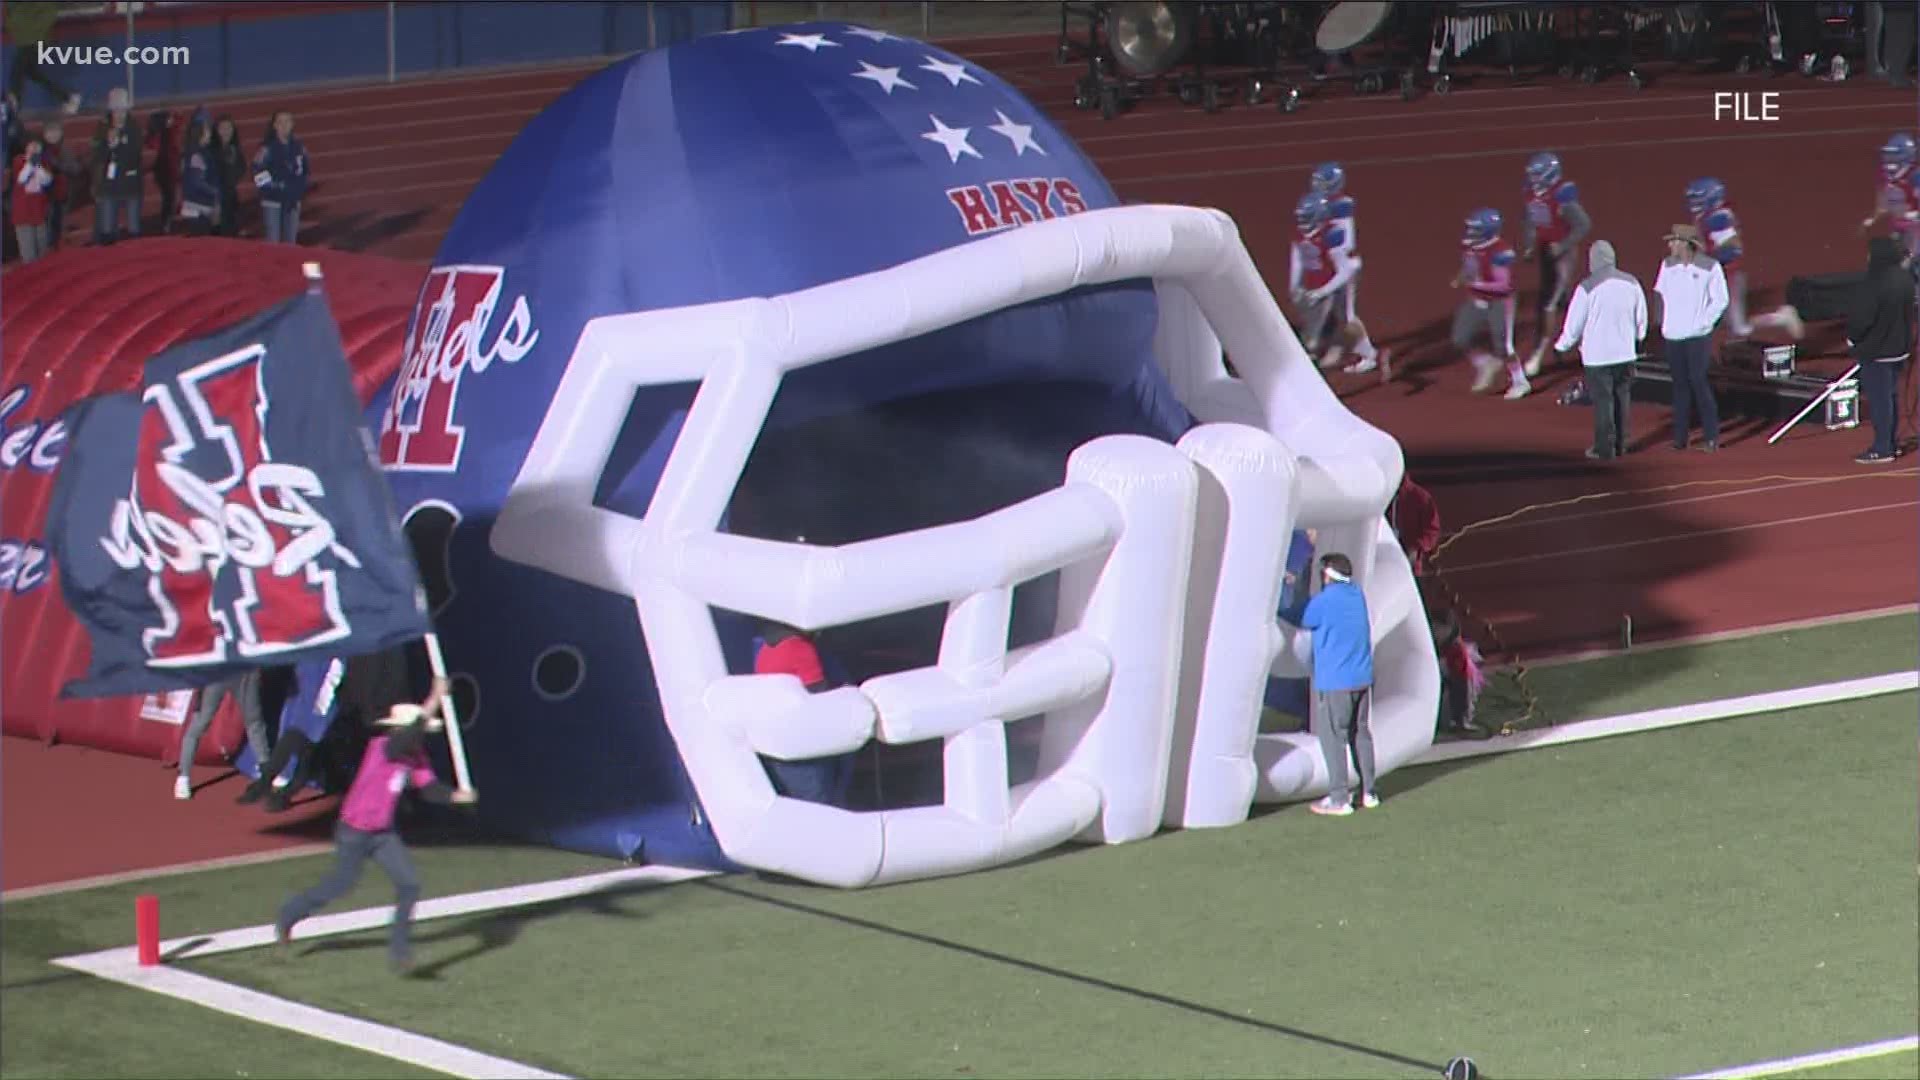 Hays High School will no longer be the home of the "Rebels."